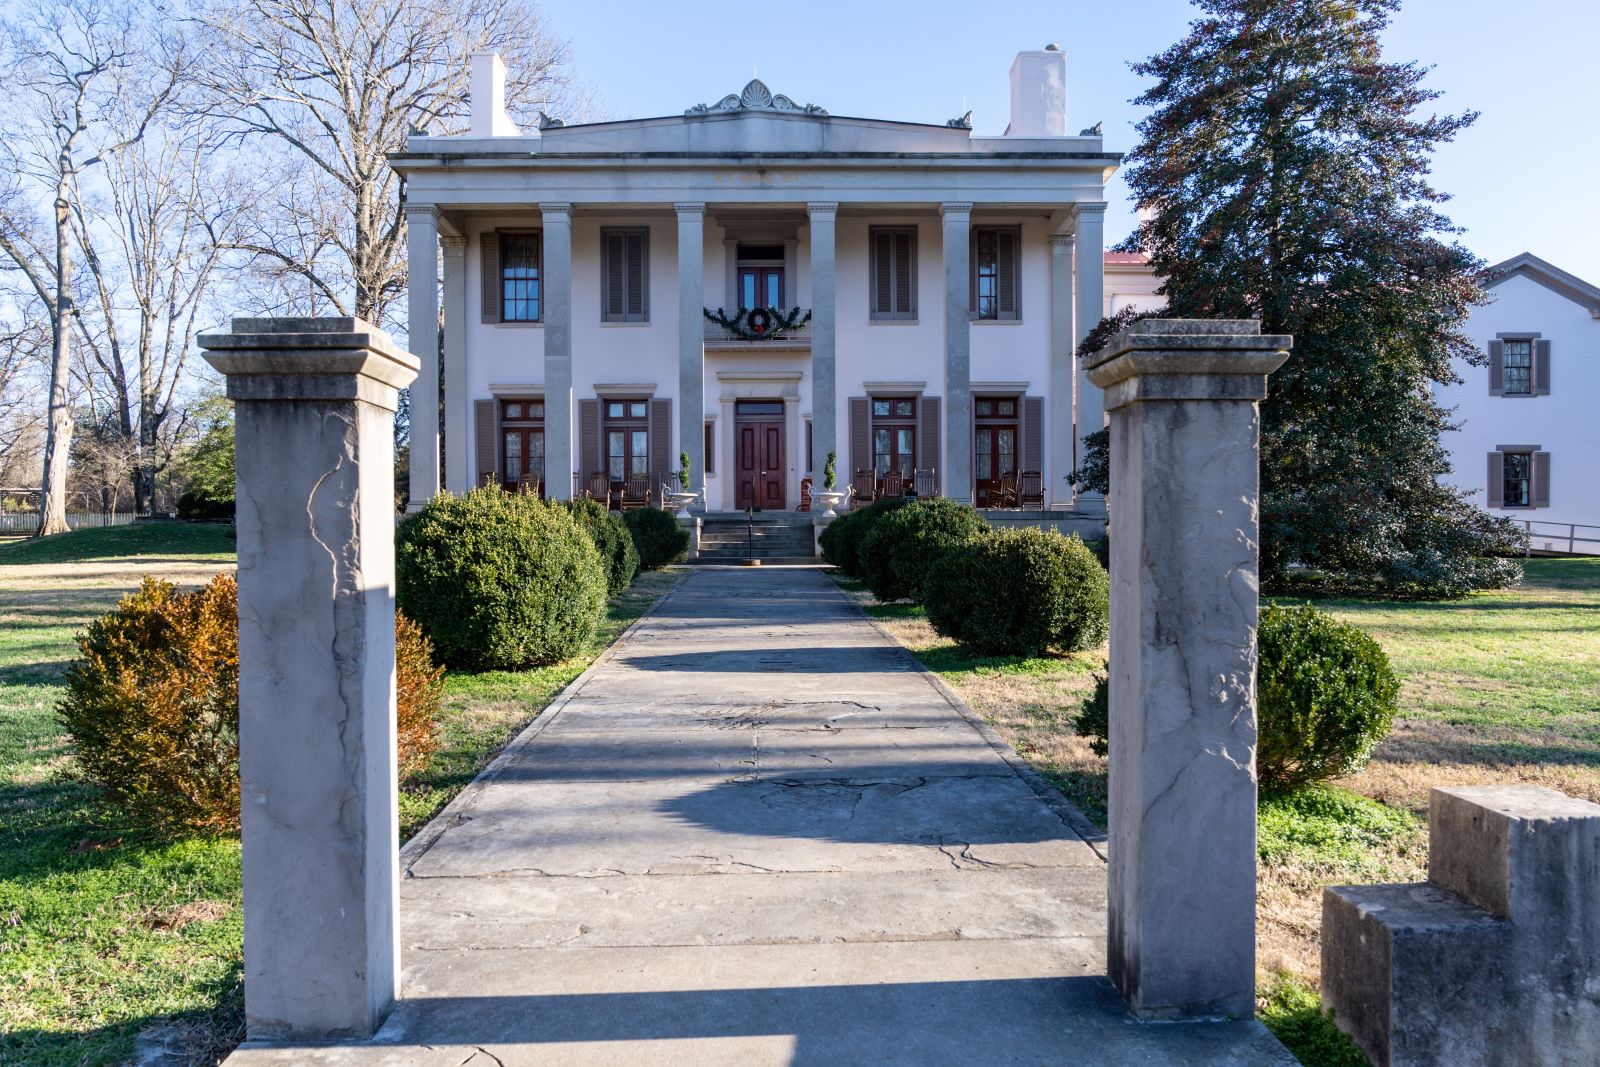 <p class="wp-caption-text">Image Credit: Shutterstock / melissamn</p>  <p>Step back in time with a visit to the Belle Meade Plantation. Take a guided tour of the historic mansion, stroll through beautiful gardens, and learn about the lives of the people who lived and worked on the estate.</p>